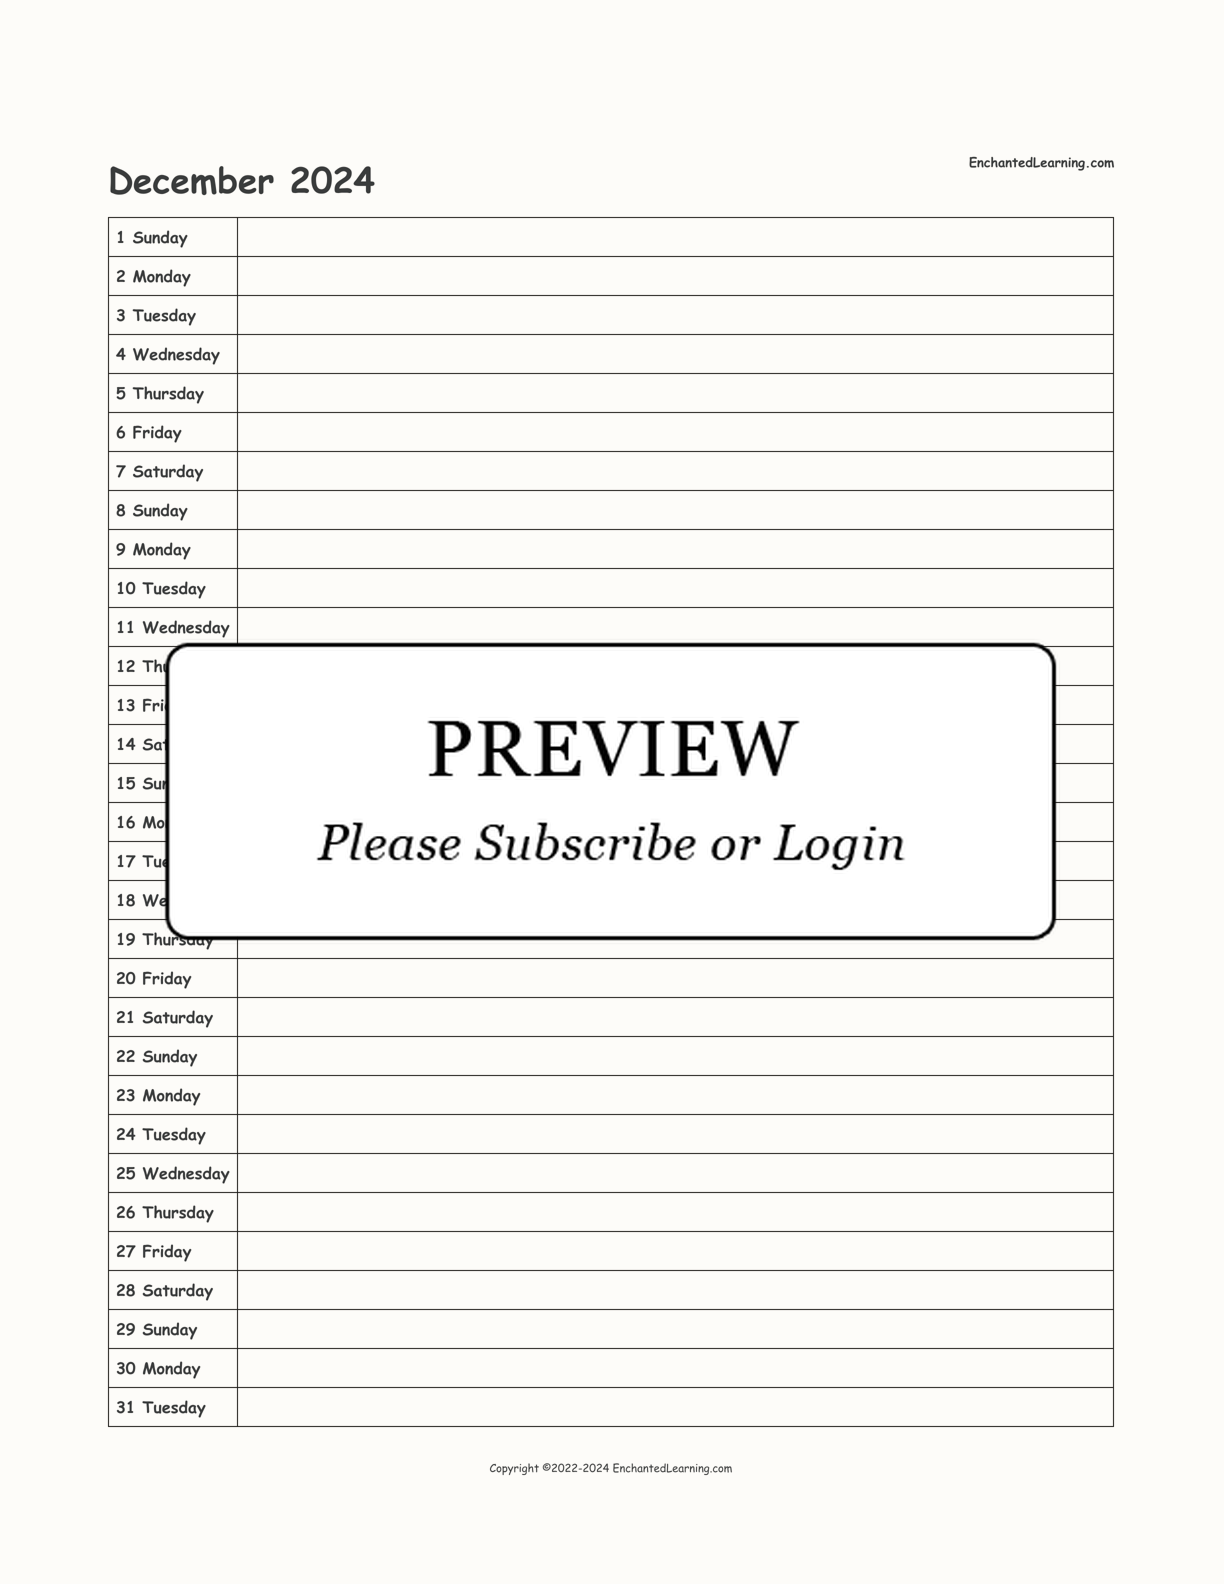 2024 Scheduling Calendar interactive printout page 12